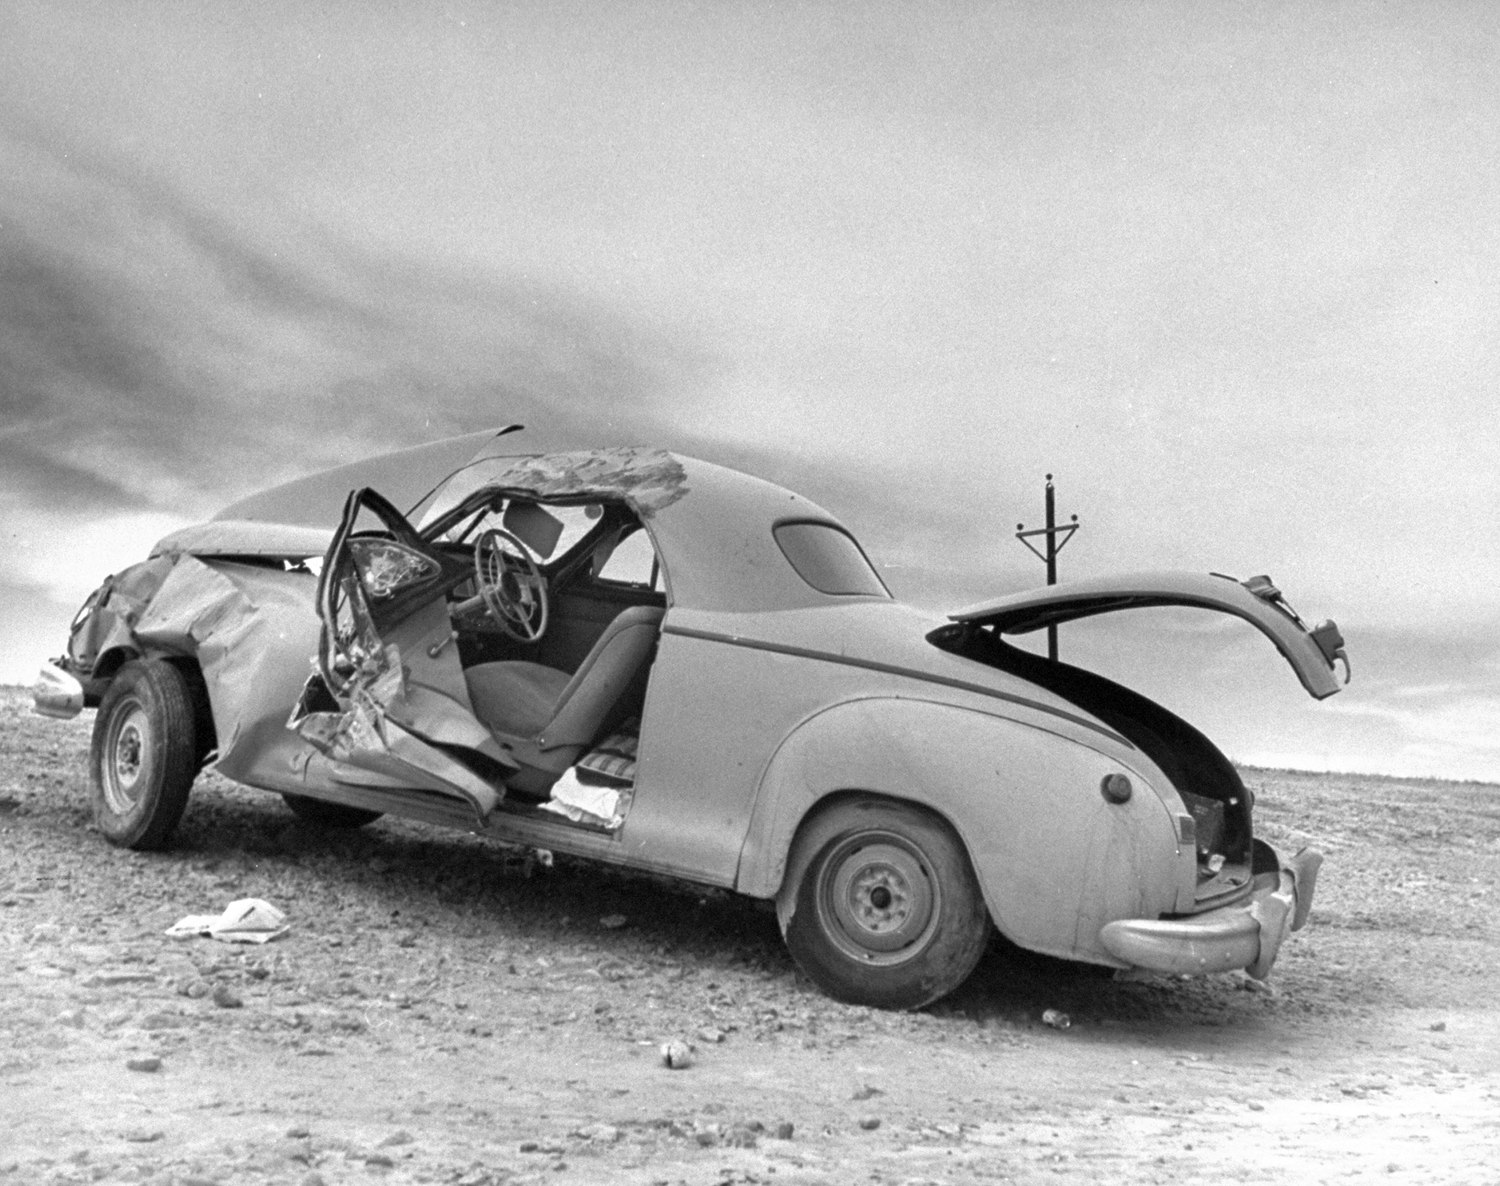 Scene after driver fell asleep at the wheel on Route 30, Nebraska, 1948.